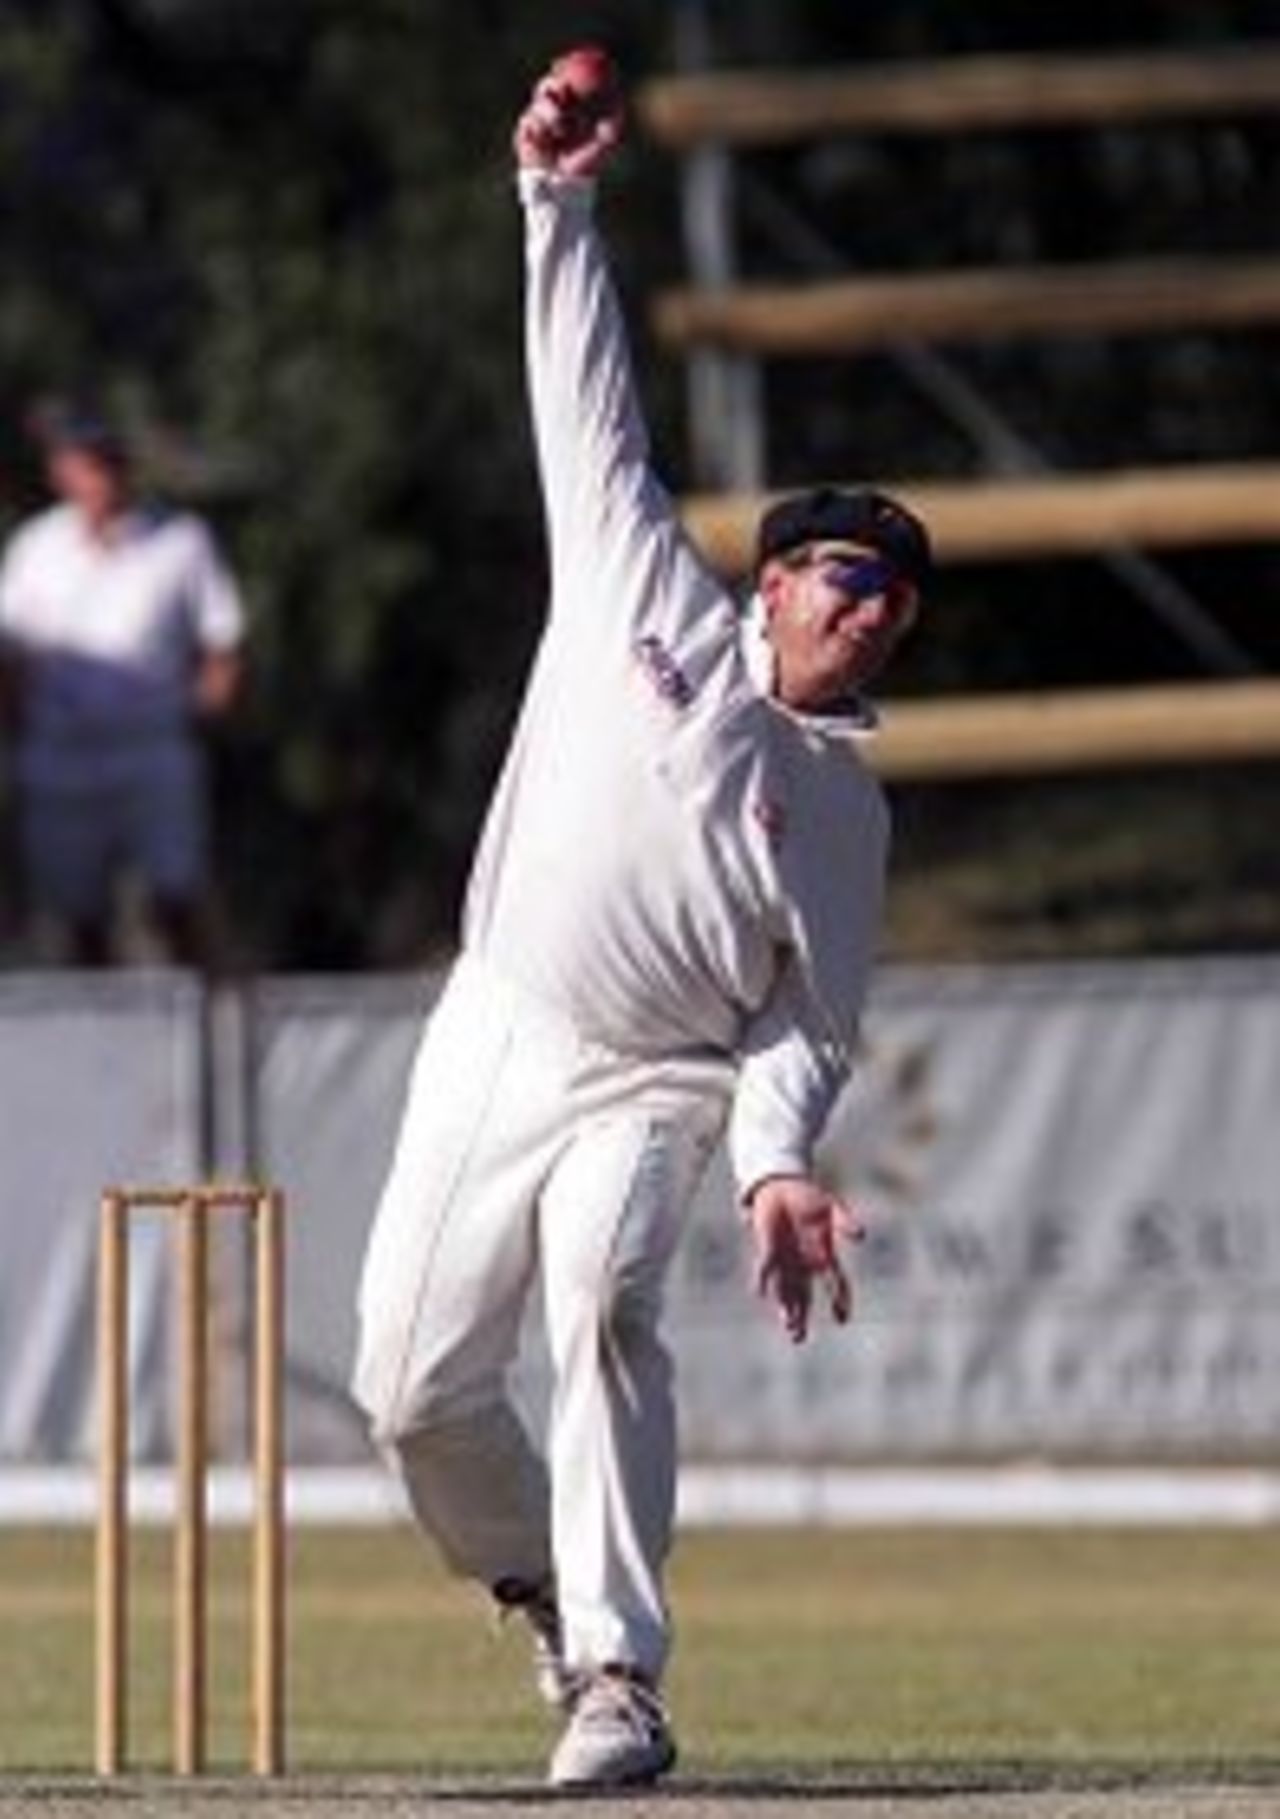 11 Oct 1999: Ian Healy of Australia the usual wicketkeeper, in the unusual position of bowling, during the tour match between the Zimbabwe President's XI and Australia at Queen's Sports Club, Bulawayo, Zimbabwe.